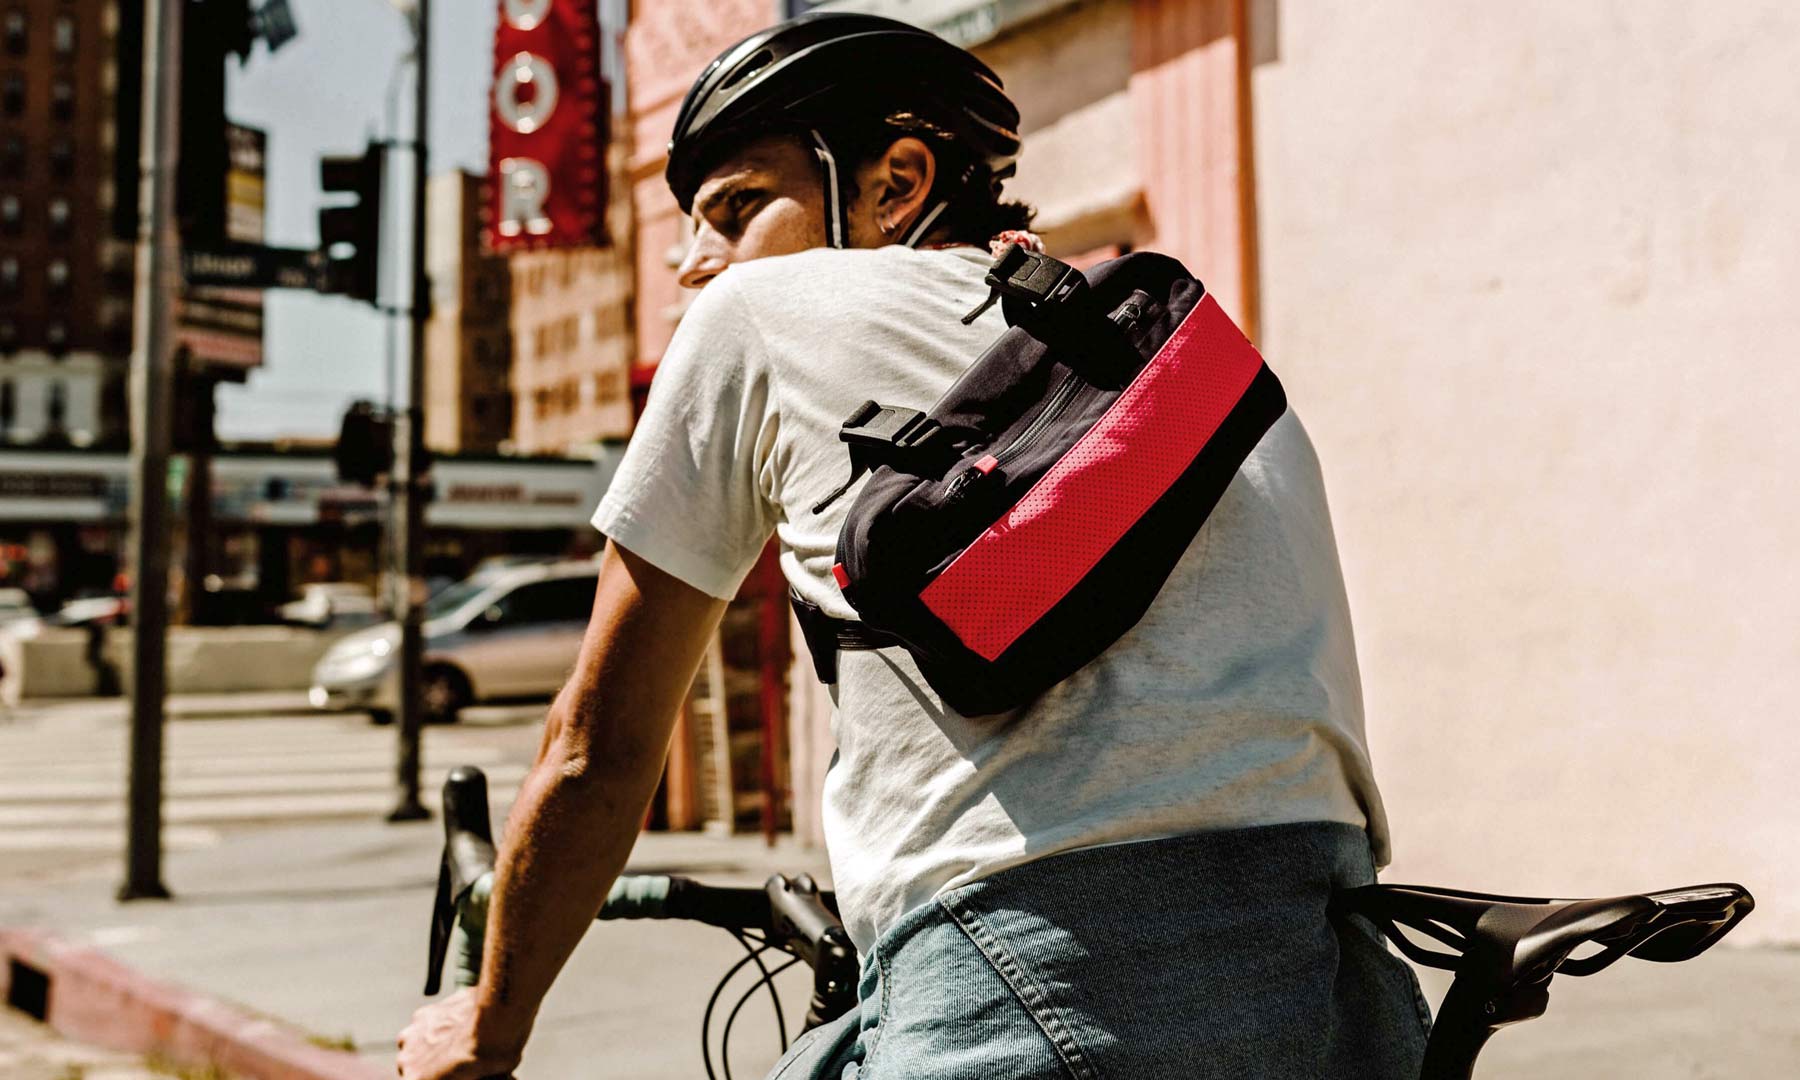 Bag Roundup: Rapha in Apple Store, ENVE x Mission hip pack & new Restrap drybags